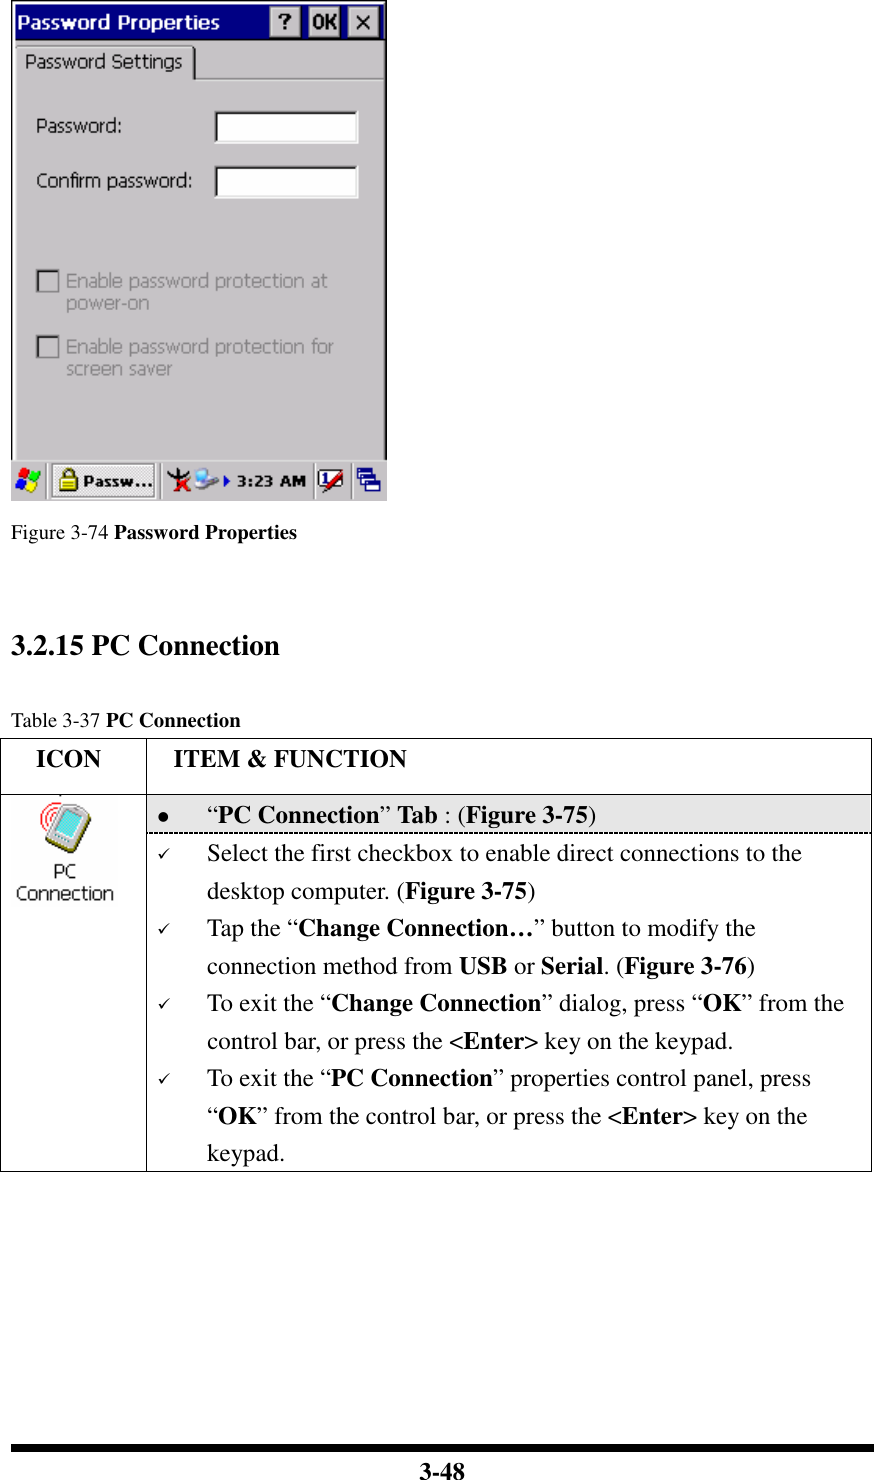  3-48    Figure 3-74 Password Properties   3.2.15 PC Connection    Table 3-37 PC Connection     ICON  ITEM &amp; FUNCTION  “PC Connection” Tab : (Figure 3-75)   Select the first checkbox to enable direct connections to the desktop computer. (Figure 3-75)  Tap the “Change Connection…” button to modify the connection method from USB or Serial. (Figure 3-76)  To exit the “Change Connection” dialog, press “OK” from the control bar, or press the &lt;Enter&gt; key on the keypad.  To exit the “PC Connection” properties control panel, press “OK” from the control bar, or press the &lt;Enter&gt; key on the keypad.  